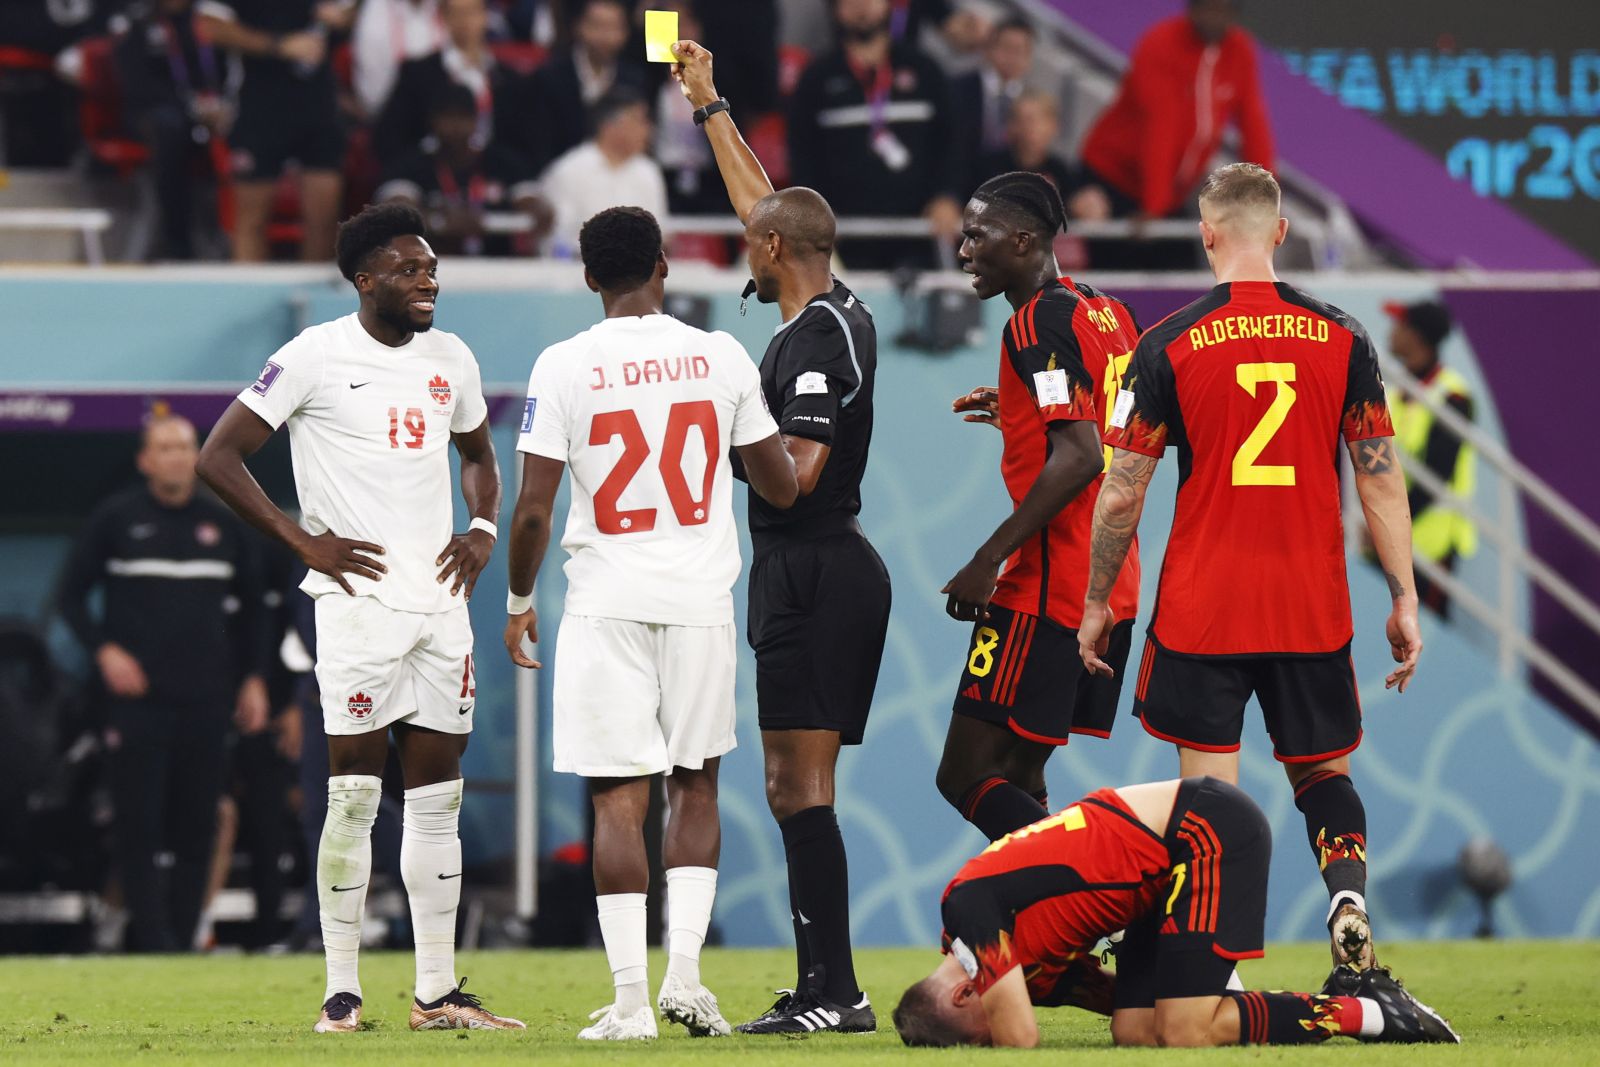 epa10323785 Referee Janny Sikazwe (C) shows the yellow card to Alphonso Davies of Canada (L) during the FIFA World Cup 2022 group F soccer match between Belgium and Canada at Ahmad bin Ali Stadium in Doha, Qatar, 23 November 2022.  EPA/Rungroj Yongrit